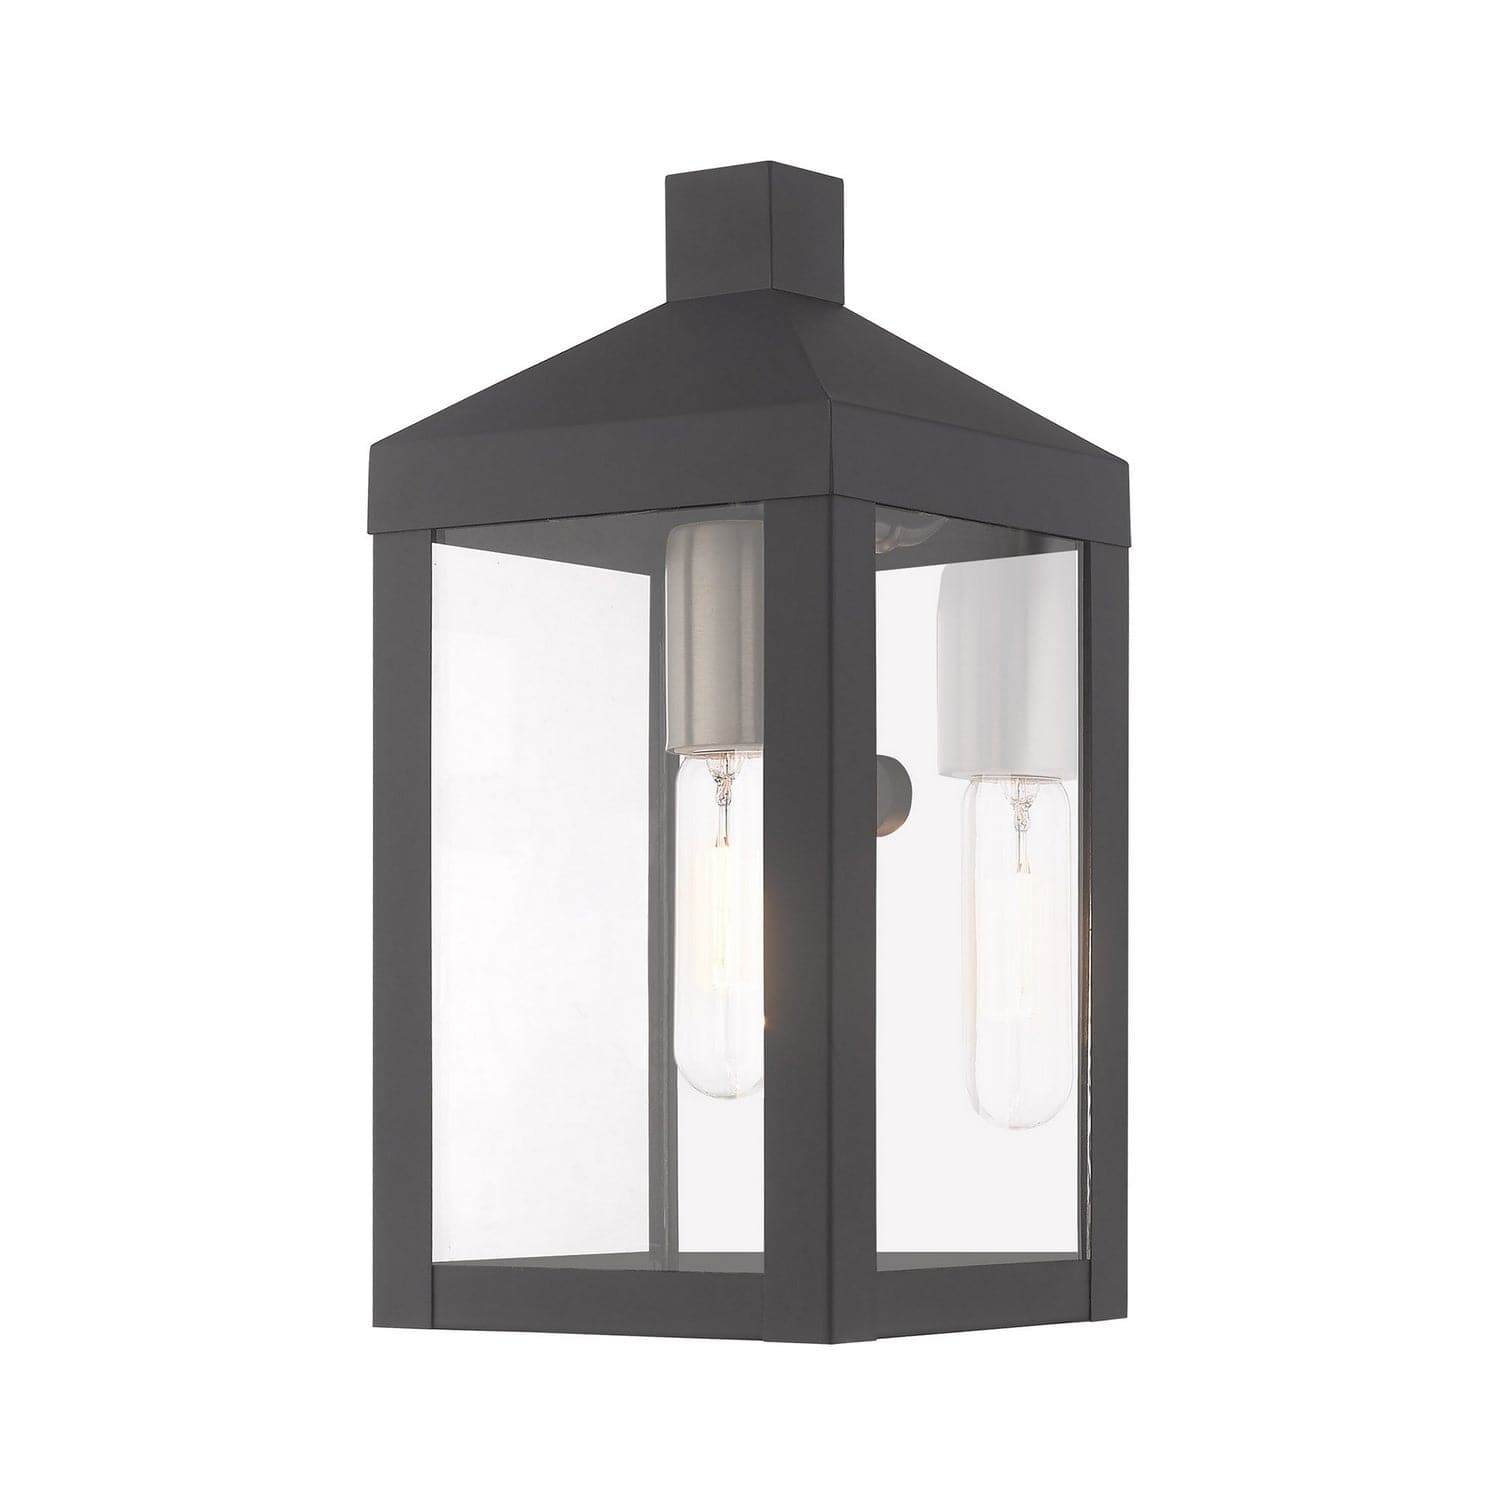 Livex Lighting - 20581-76 - One Light Outdoor Wall Lantern - Nyack - Scandinavian Gray w/ Brushed Nickels and Polished Chrome Stainless Steel